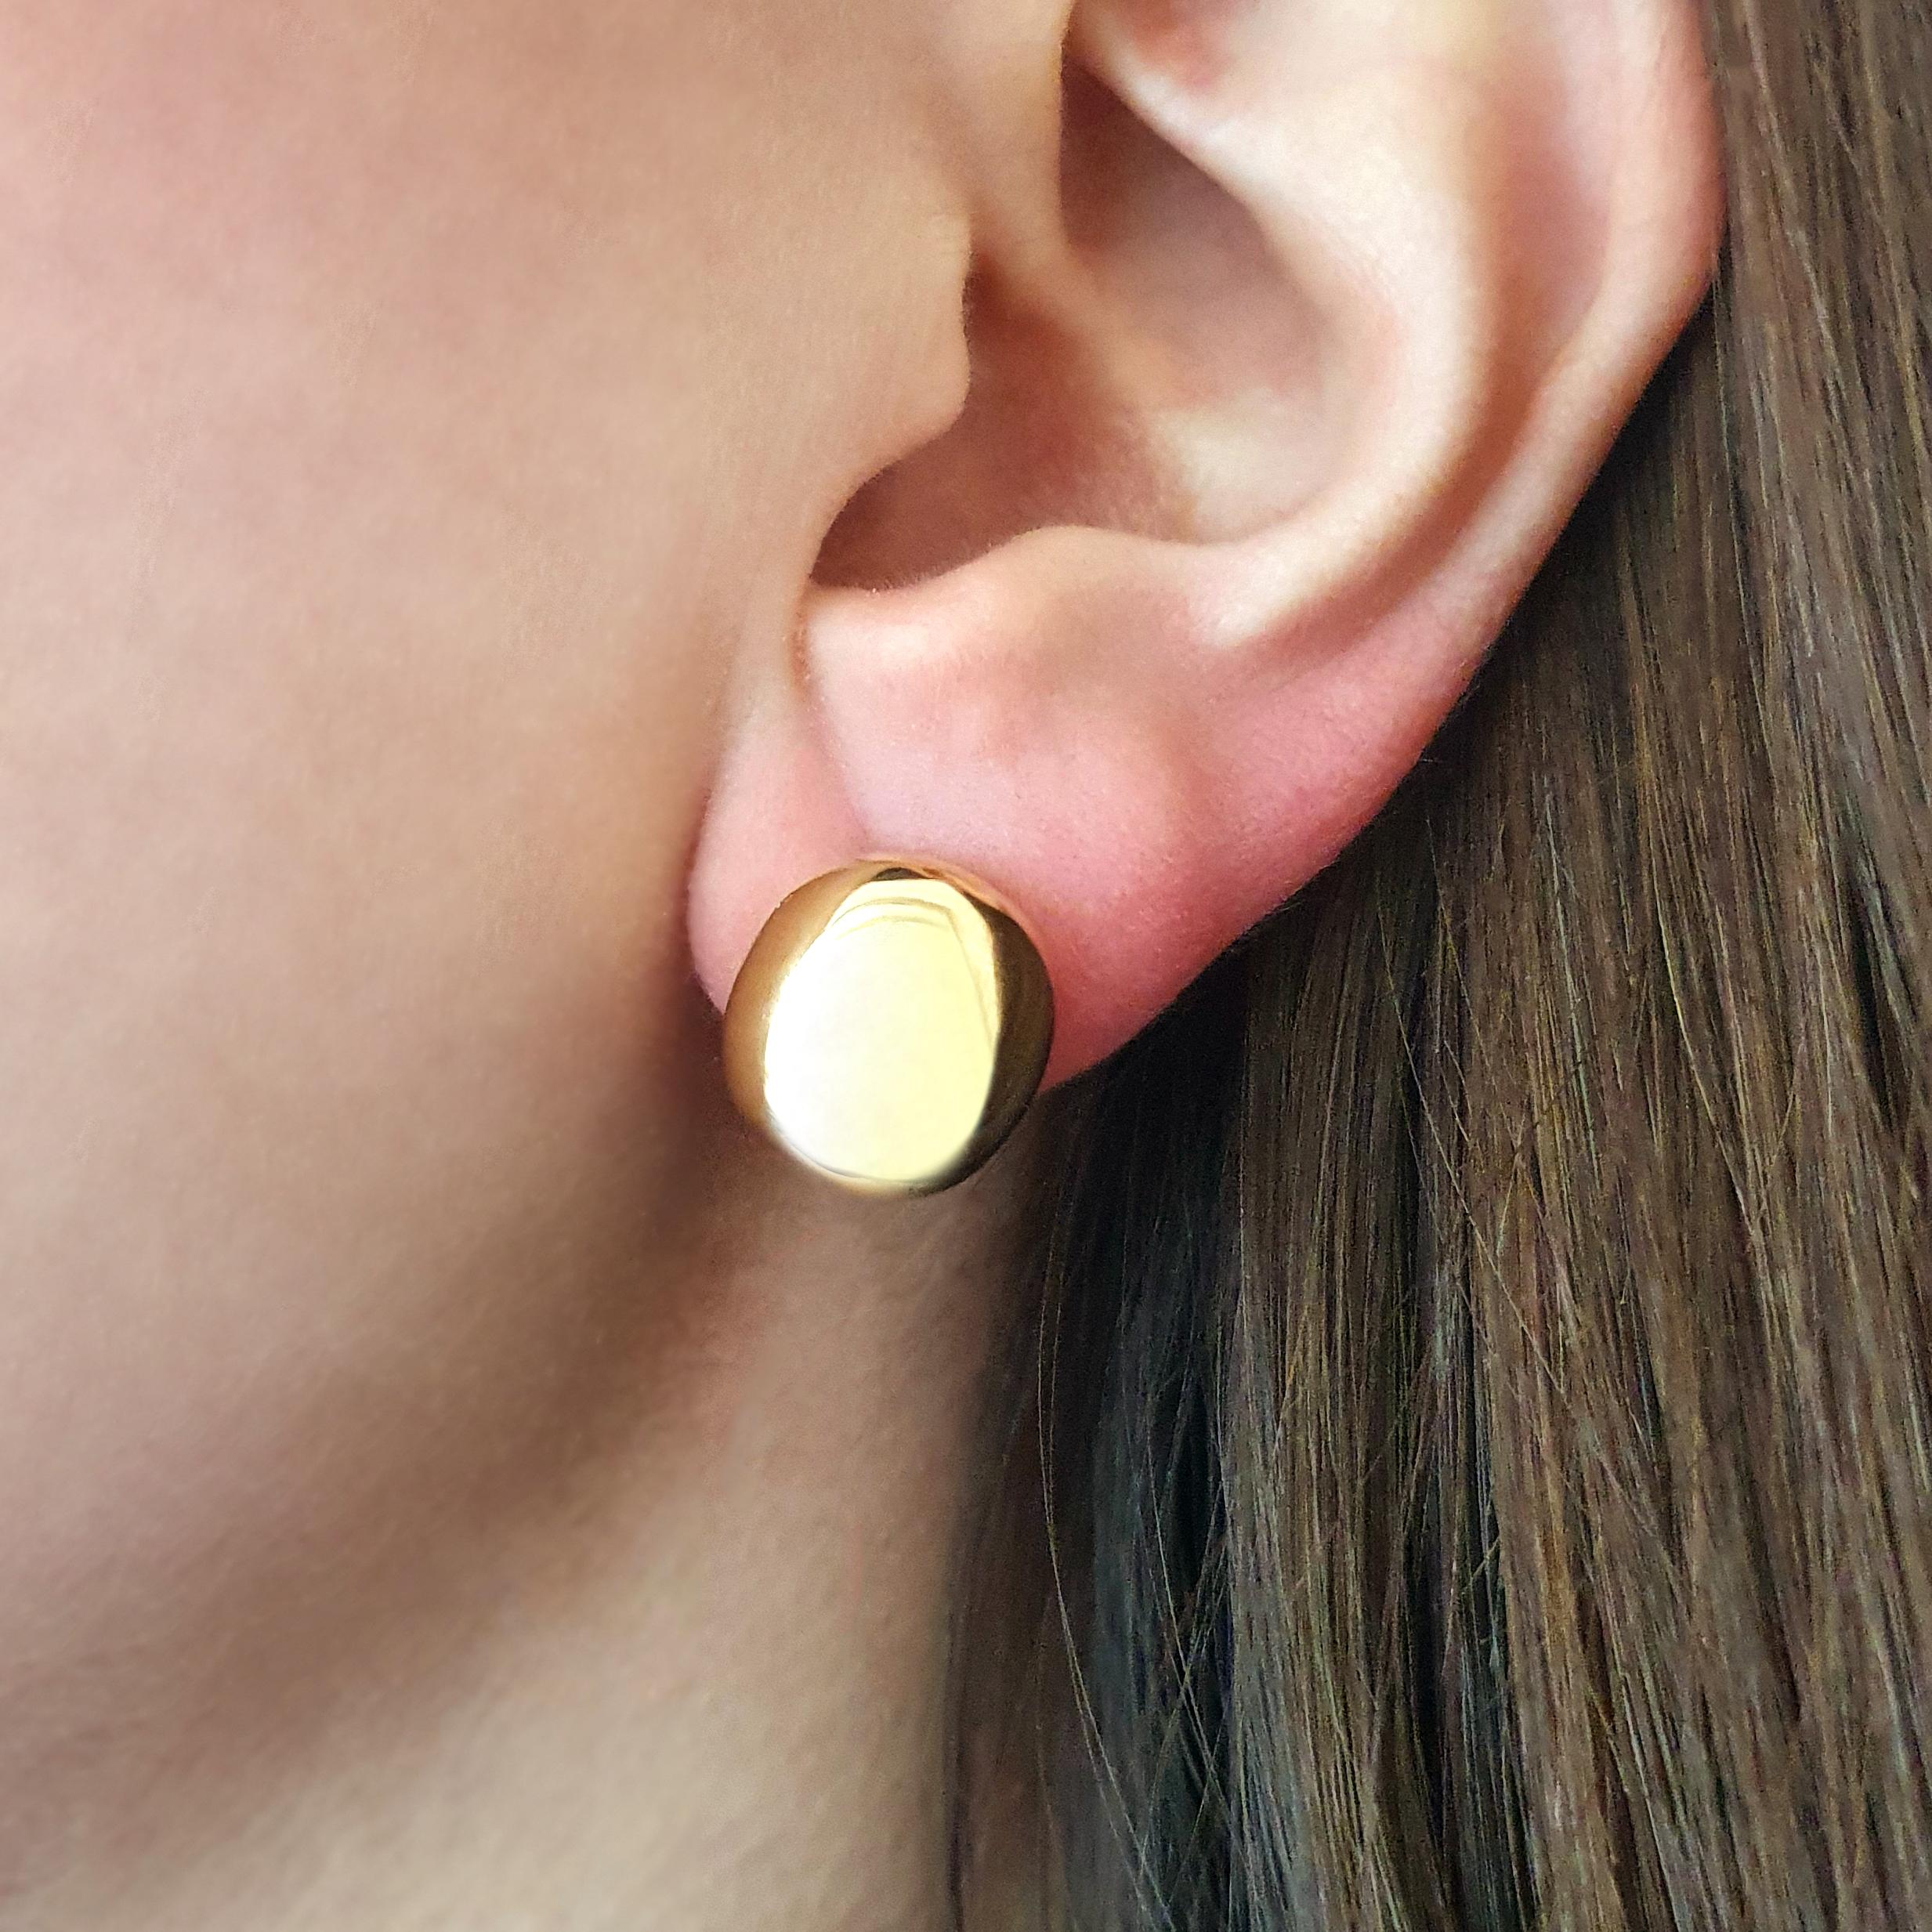 Yellow Gold 18K Bean Ear Studs.
Length: 0.59 inch (1.50 centimeters).
Thickness: 0.39 inch (1.00 centimeters).
Total weight: 10.86 grams.
